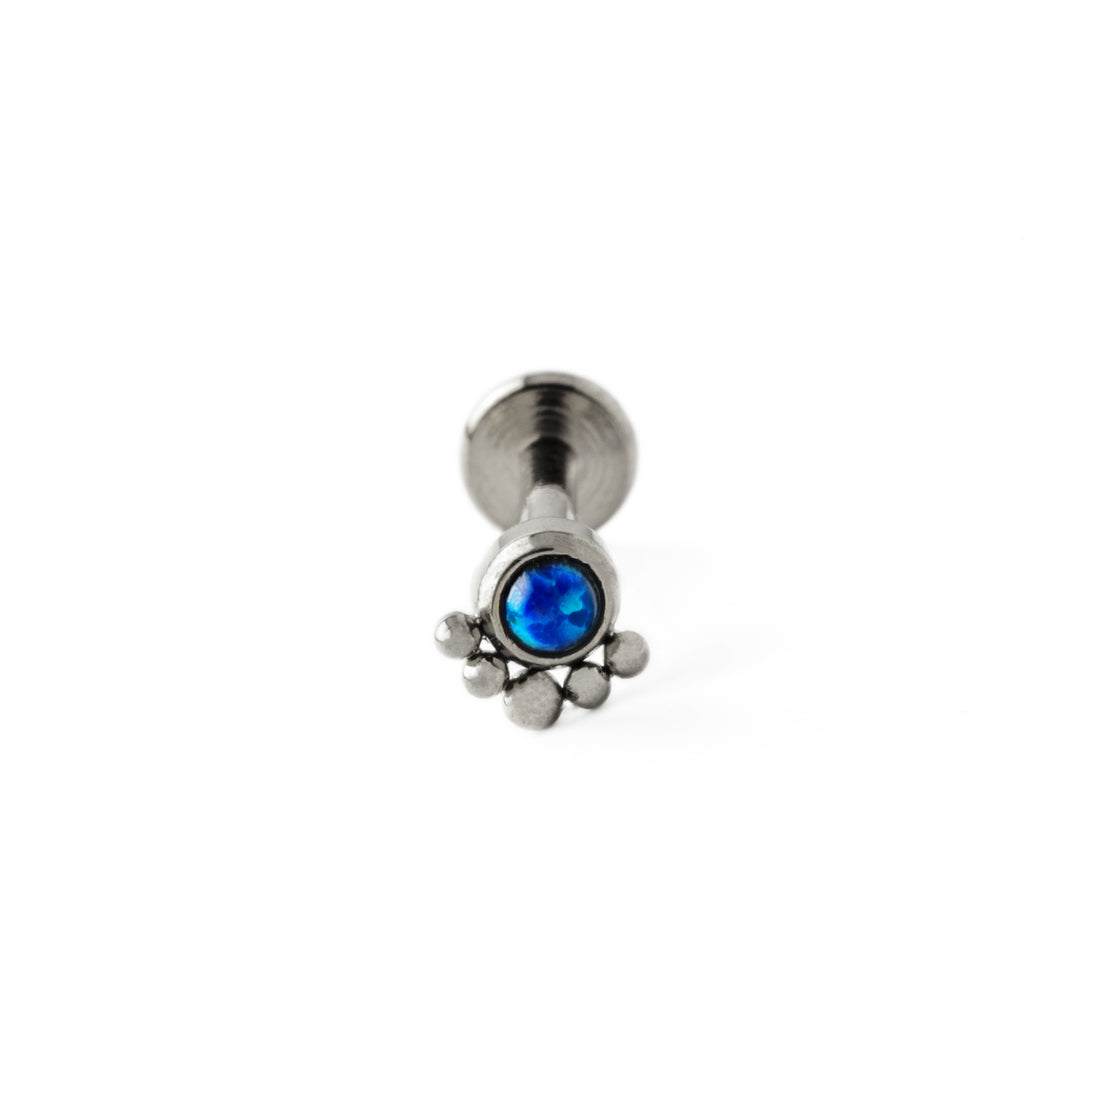 Layla surgical steel internally threaded labret with blue Opal frontal view